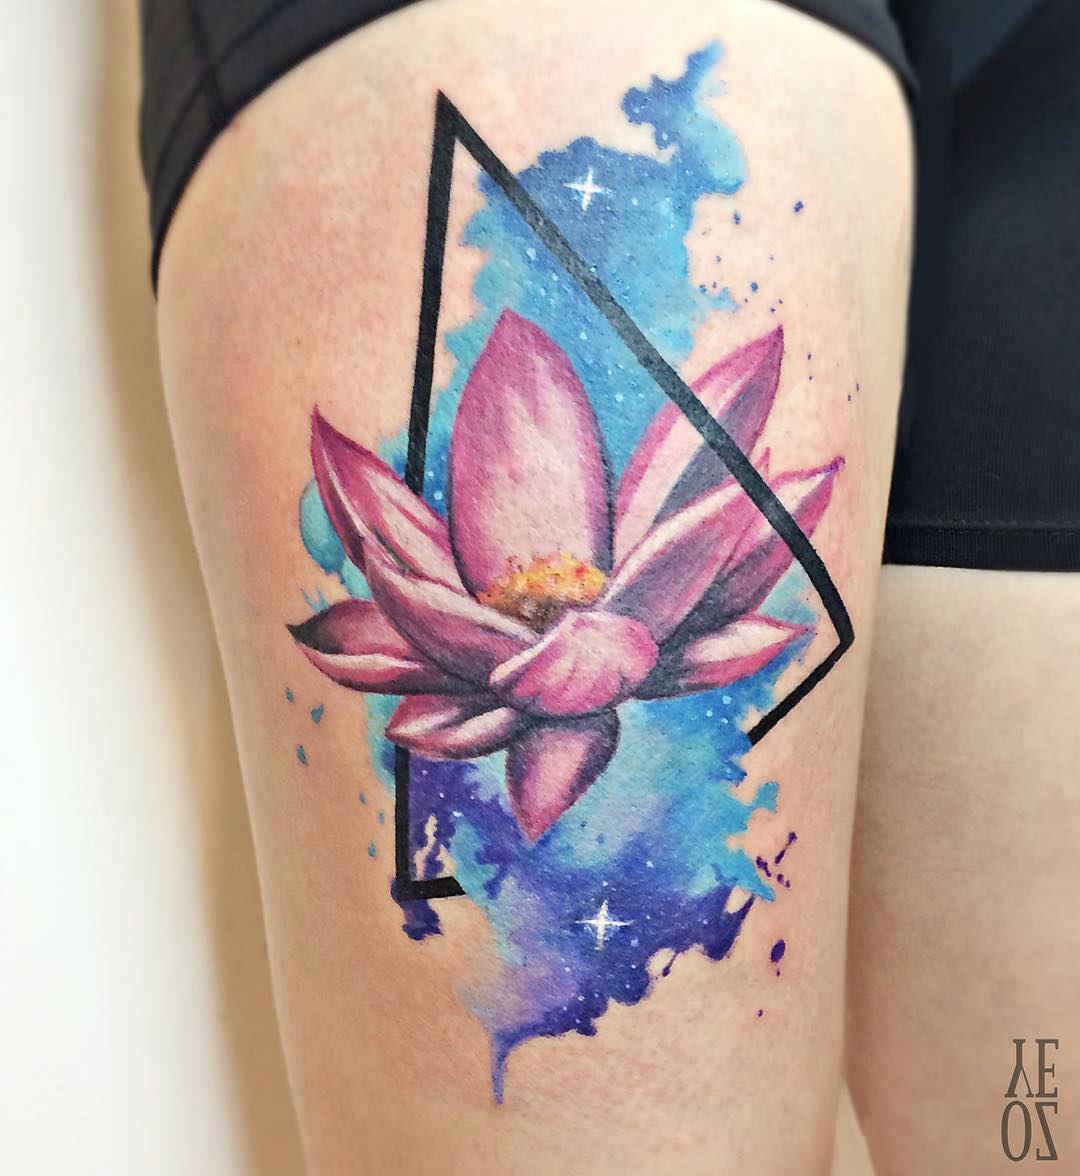 Lotus Flower Tattoo On Thigh Best Tattoo Ideas Gallery - Watercolor Lotus T...